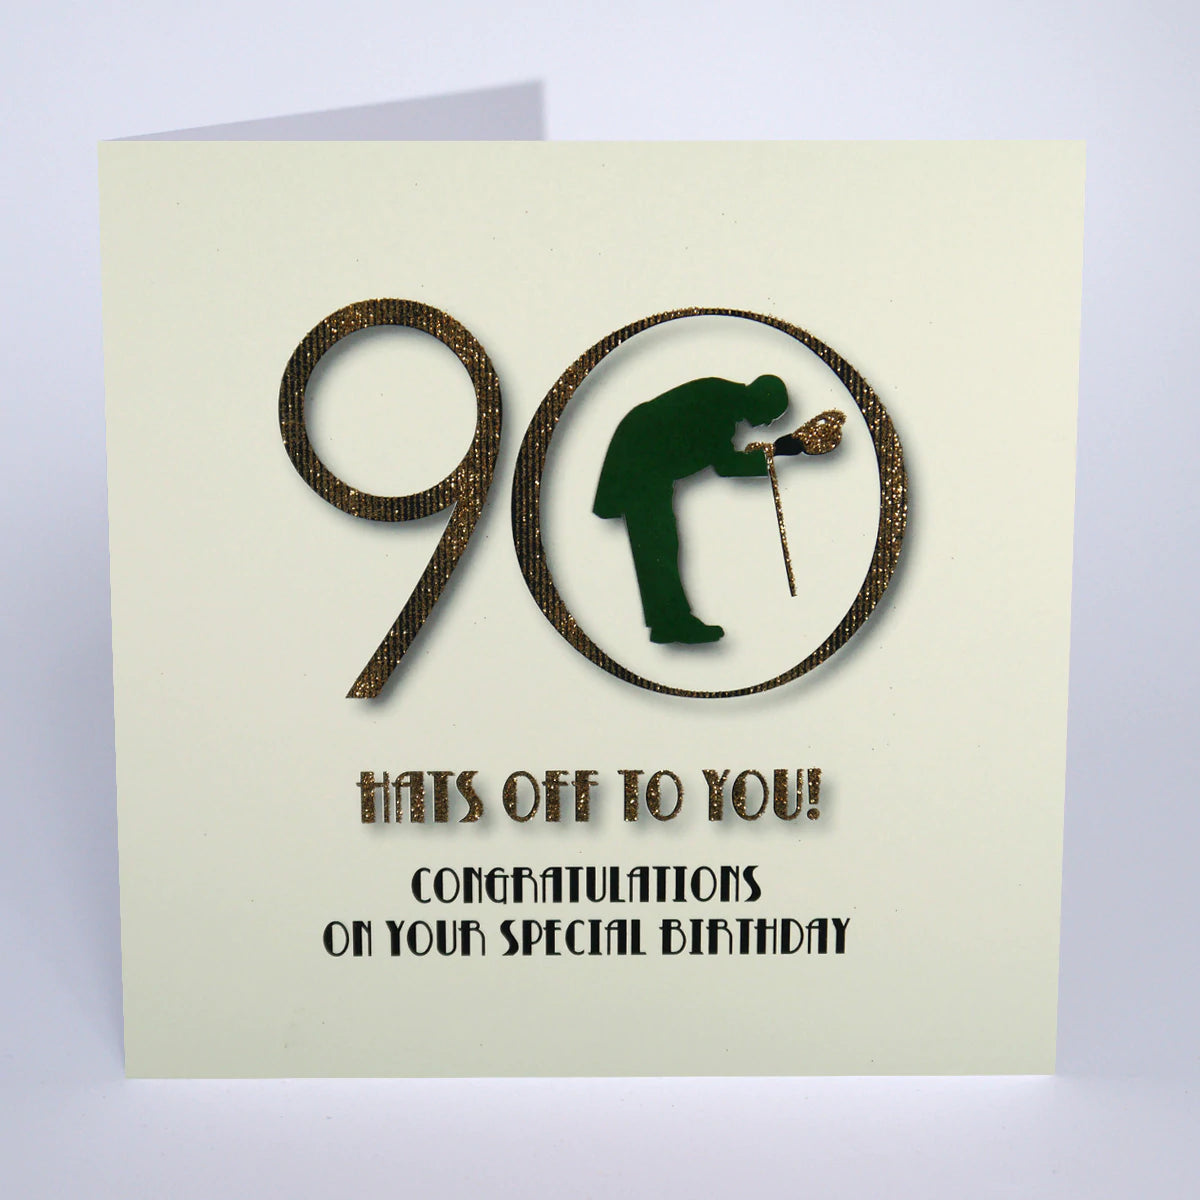 90 Hats off to you - Large Card